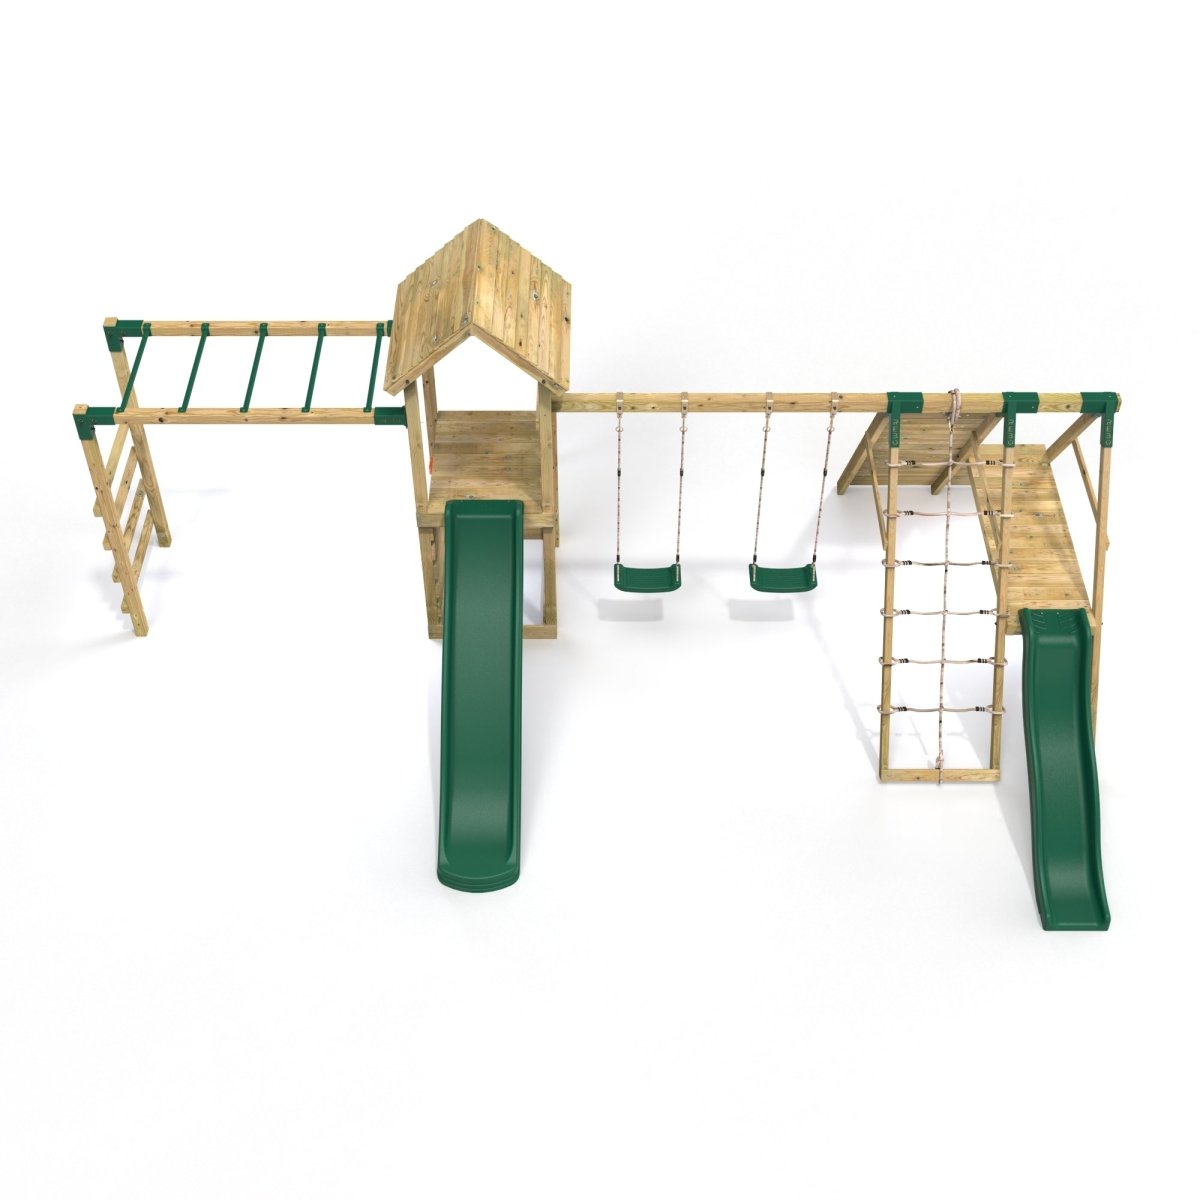 Rebo Wooden Climbing Frame with Swings, 2 Slides, Up & over Climbing wall and Monkey Bars - Pennine